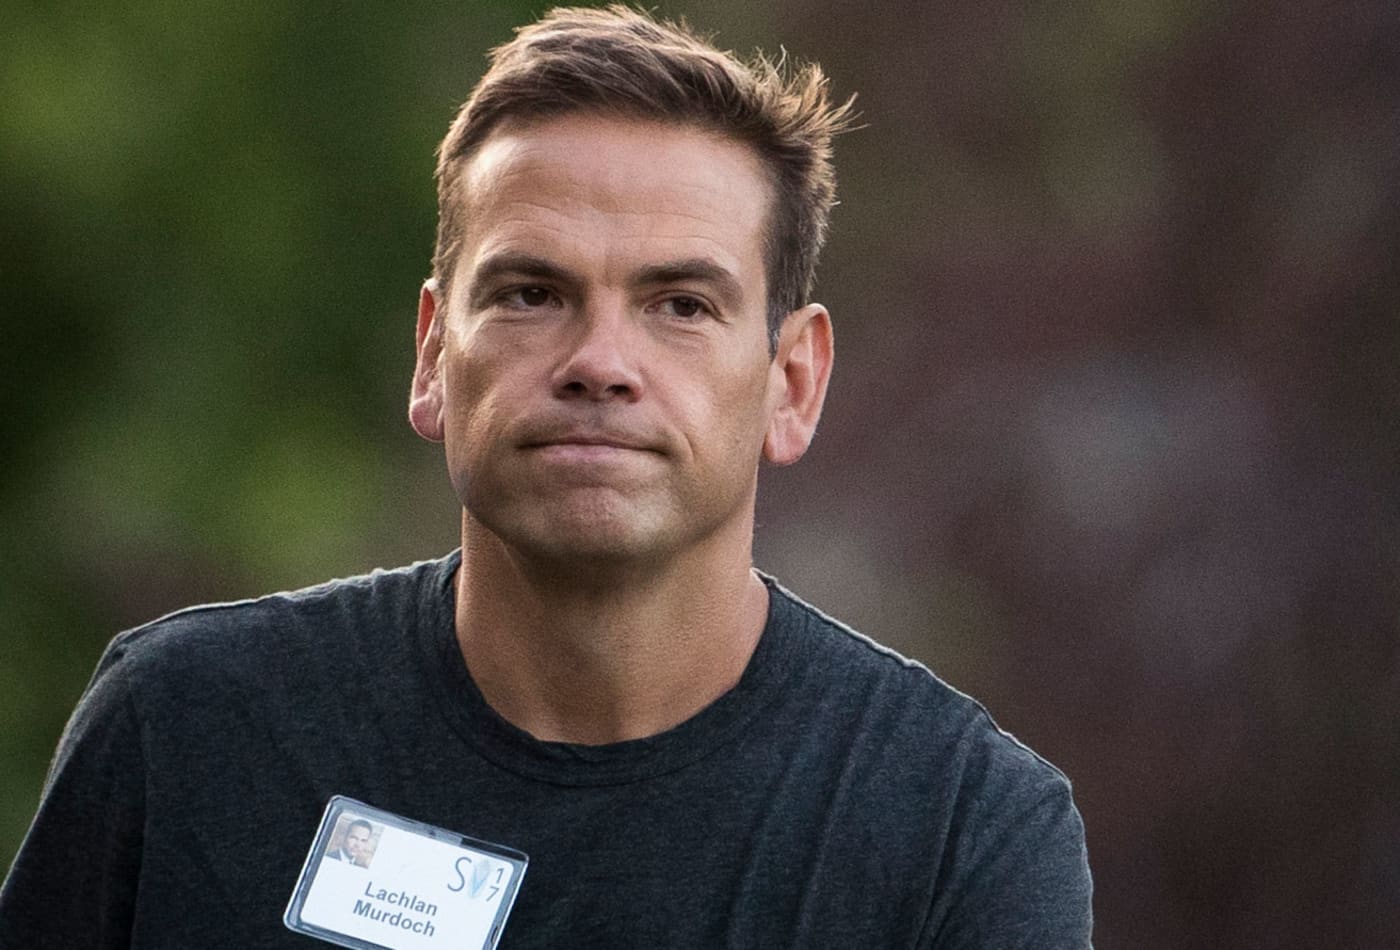 Lachlan Murdoch News, Articles, Stories & Trends for Today1400 x 950